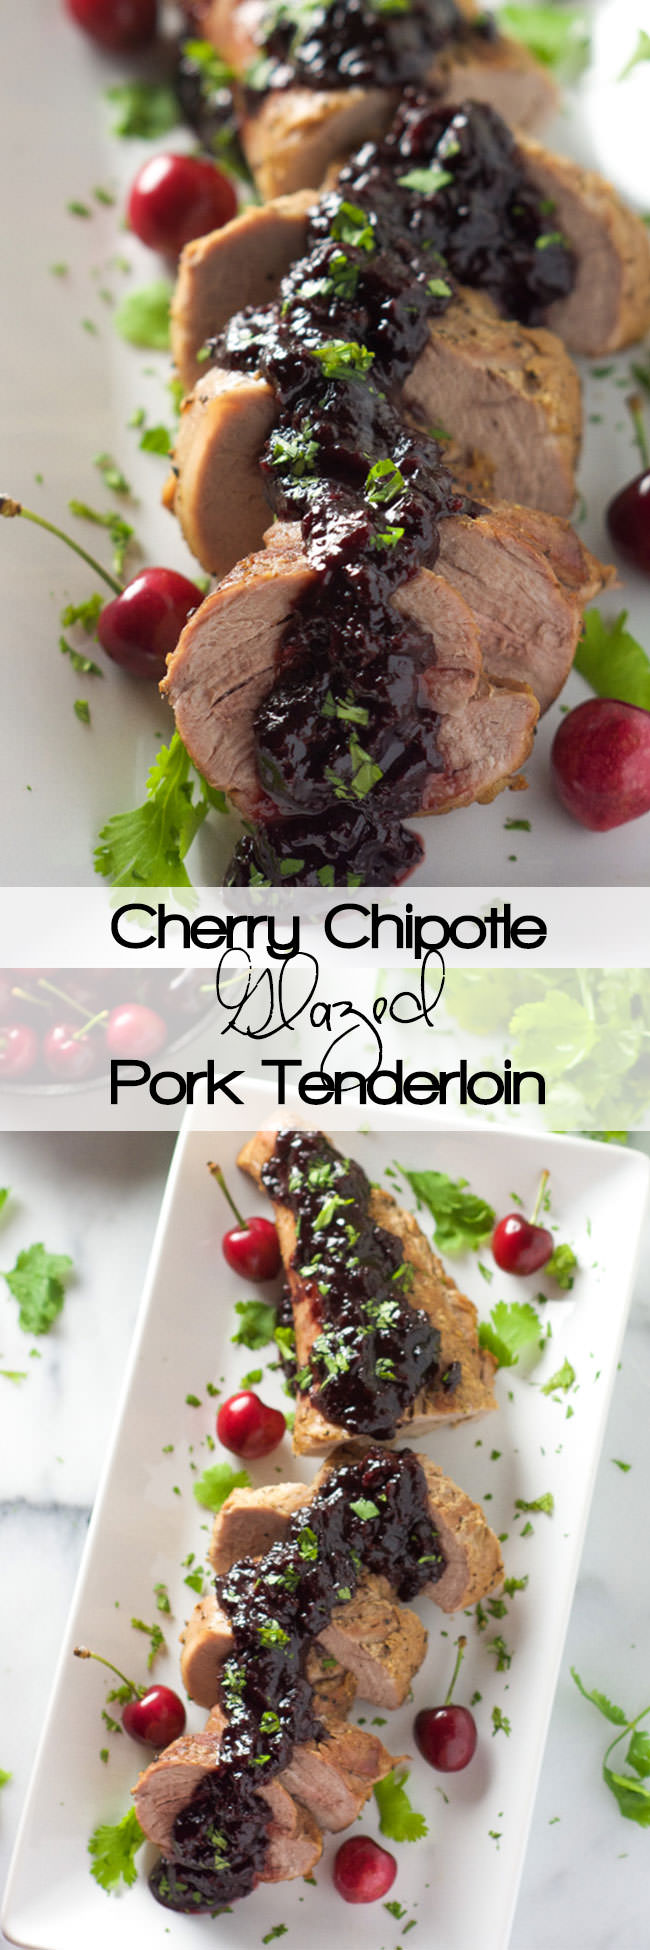 Cherry Chipotle Glazed Pork Tenderloin is a simple 5 ingredient dinner! Tender pork glazed with a chipotle spiked cherry maple sauce!